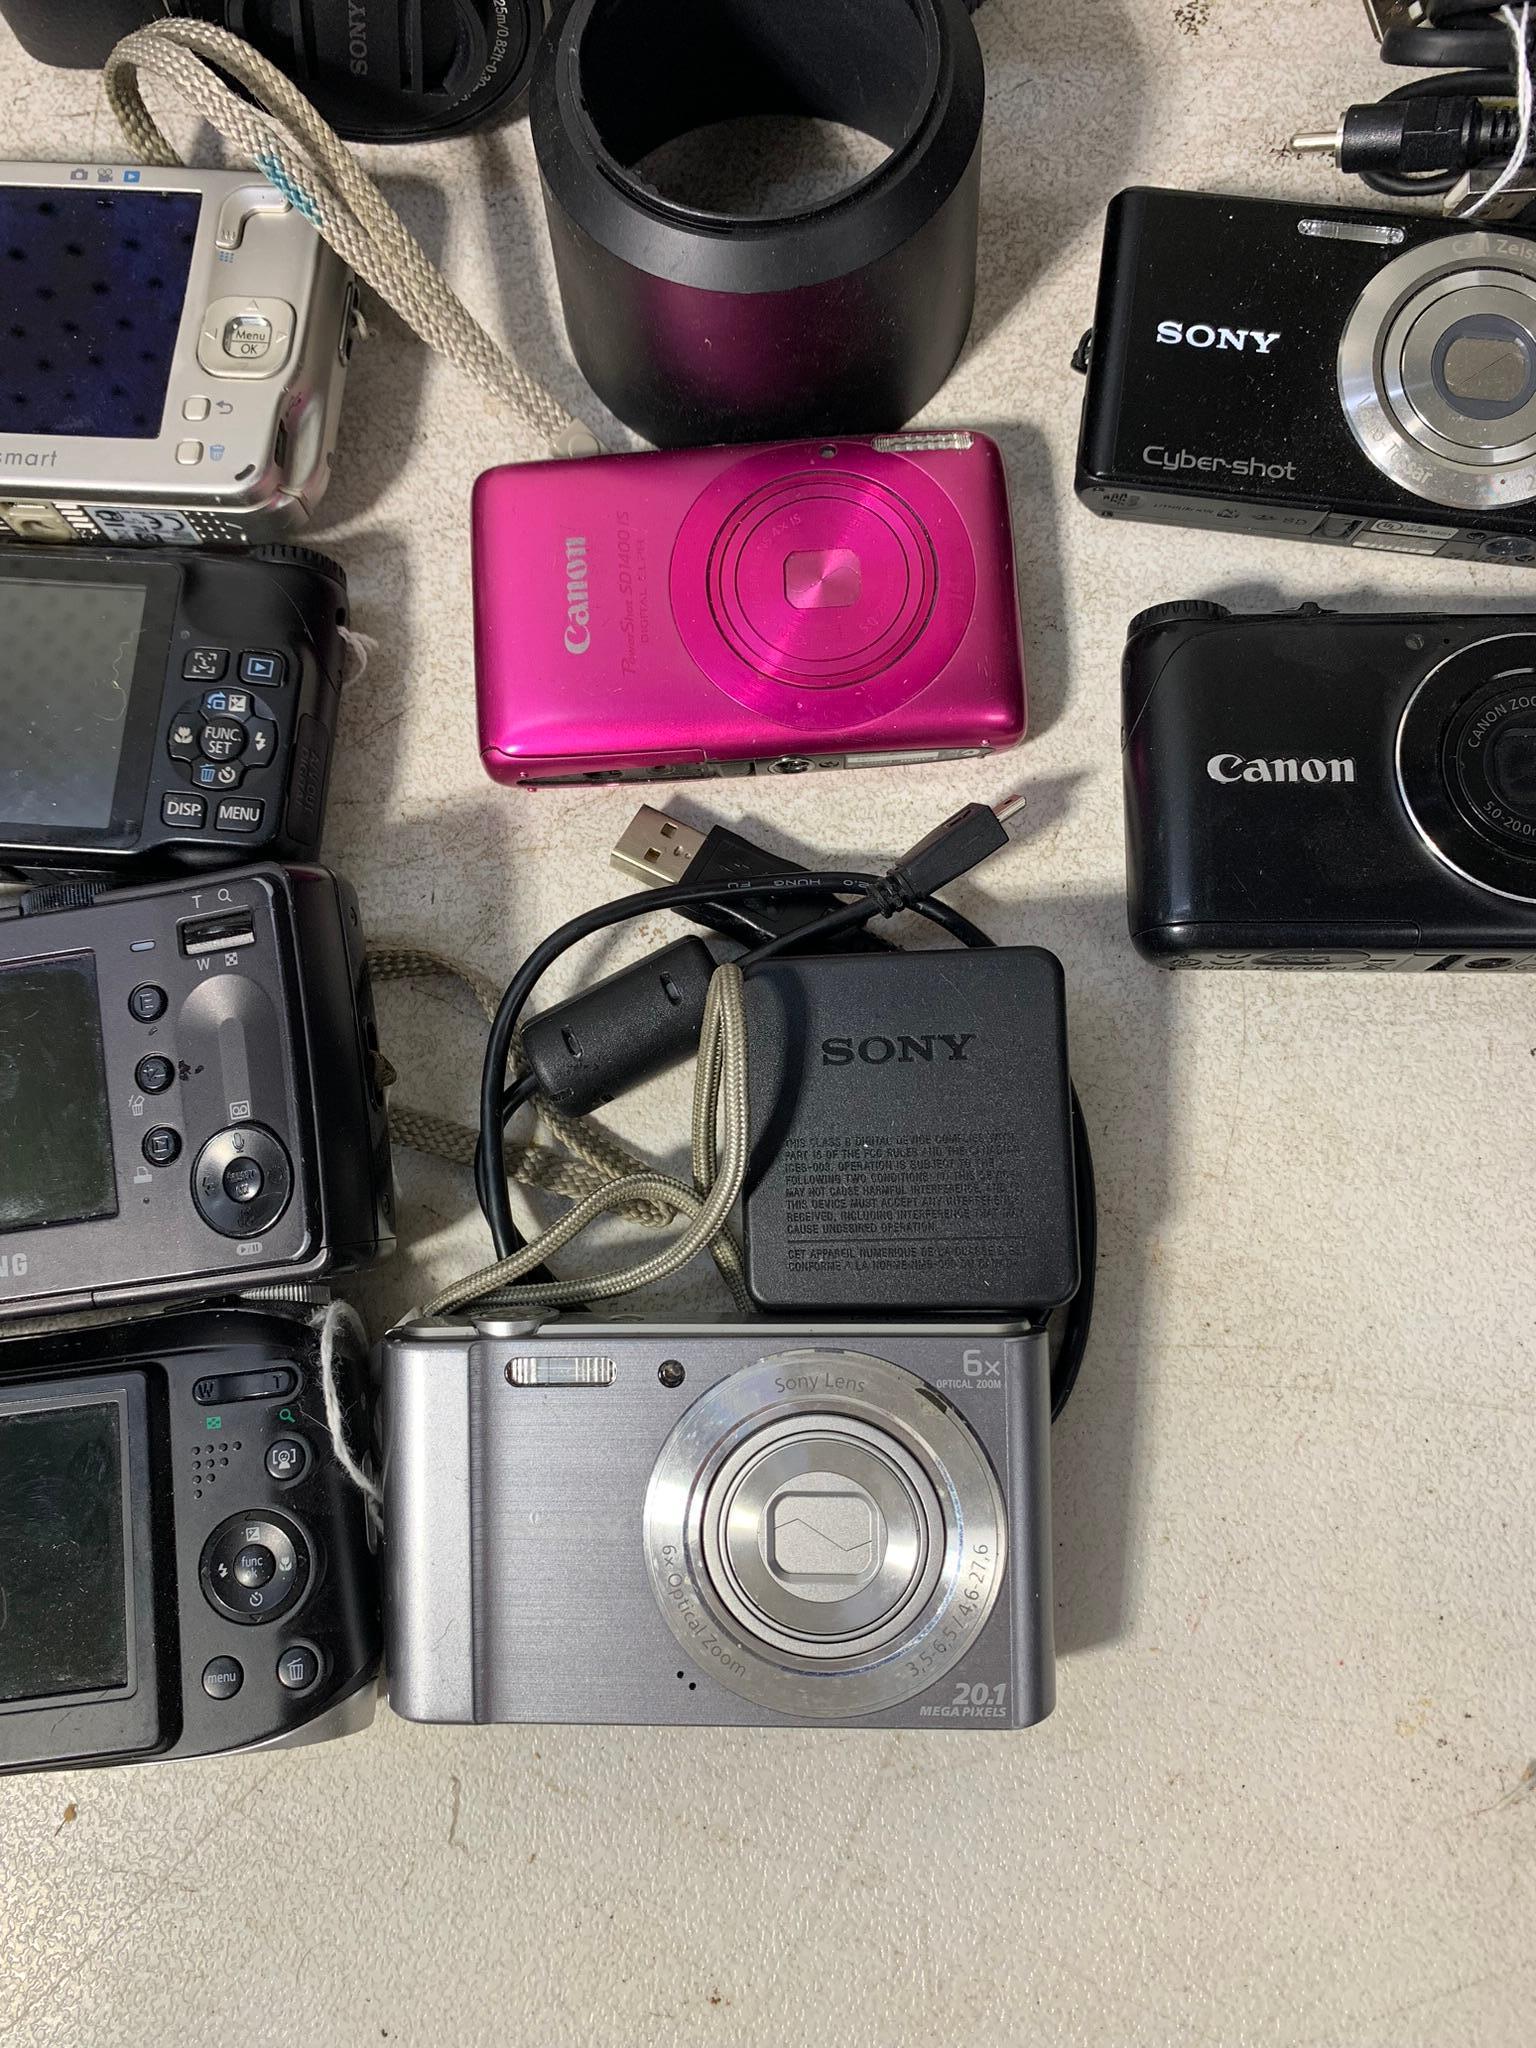 Assortment of Digital Cameras, Chargers & More